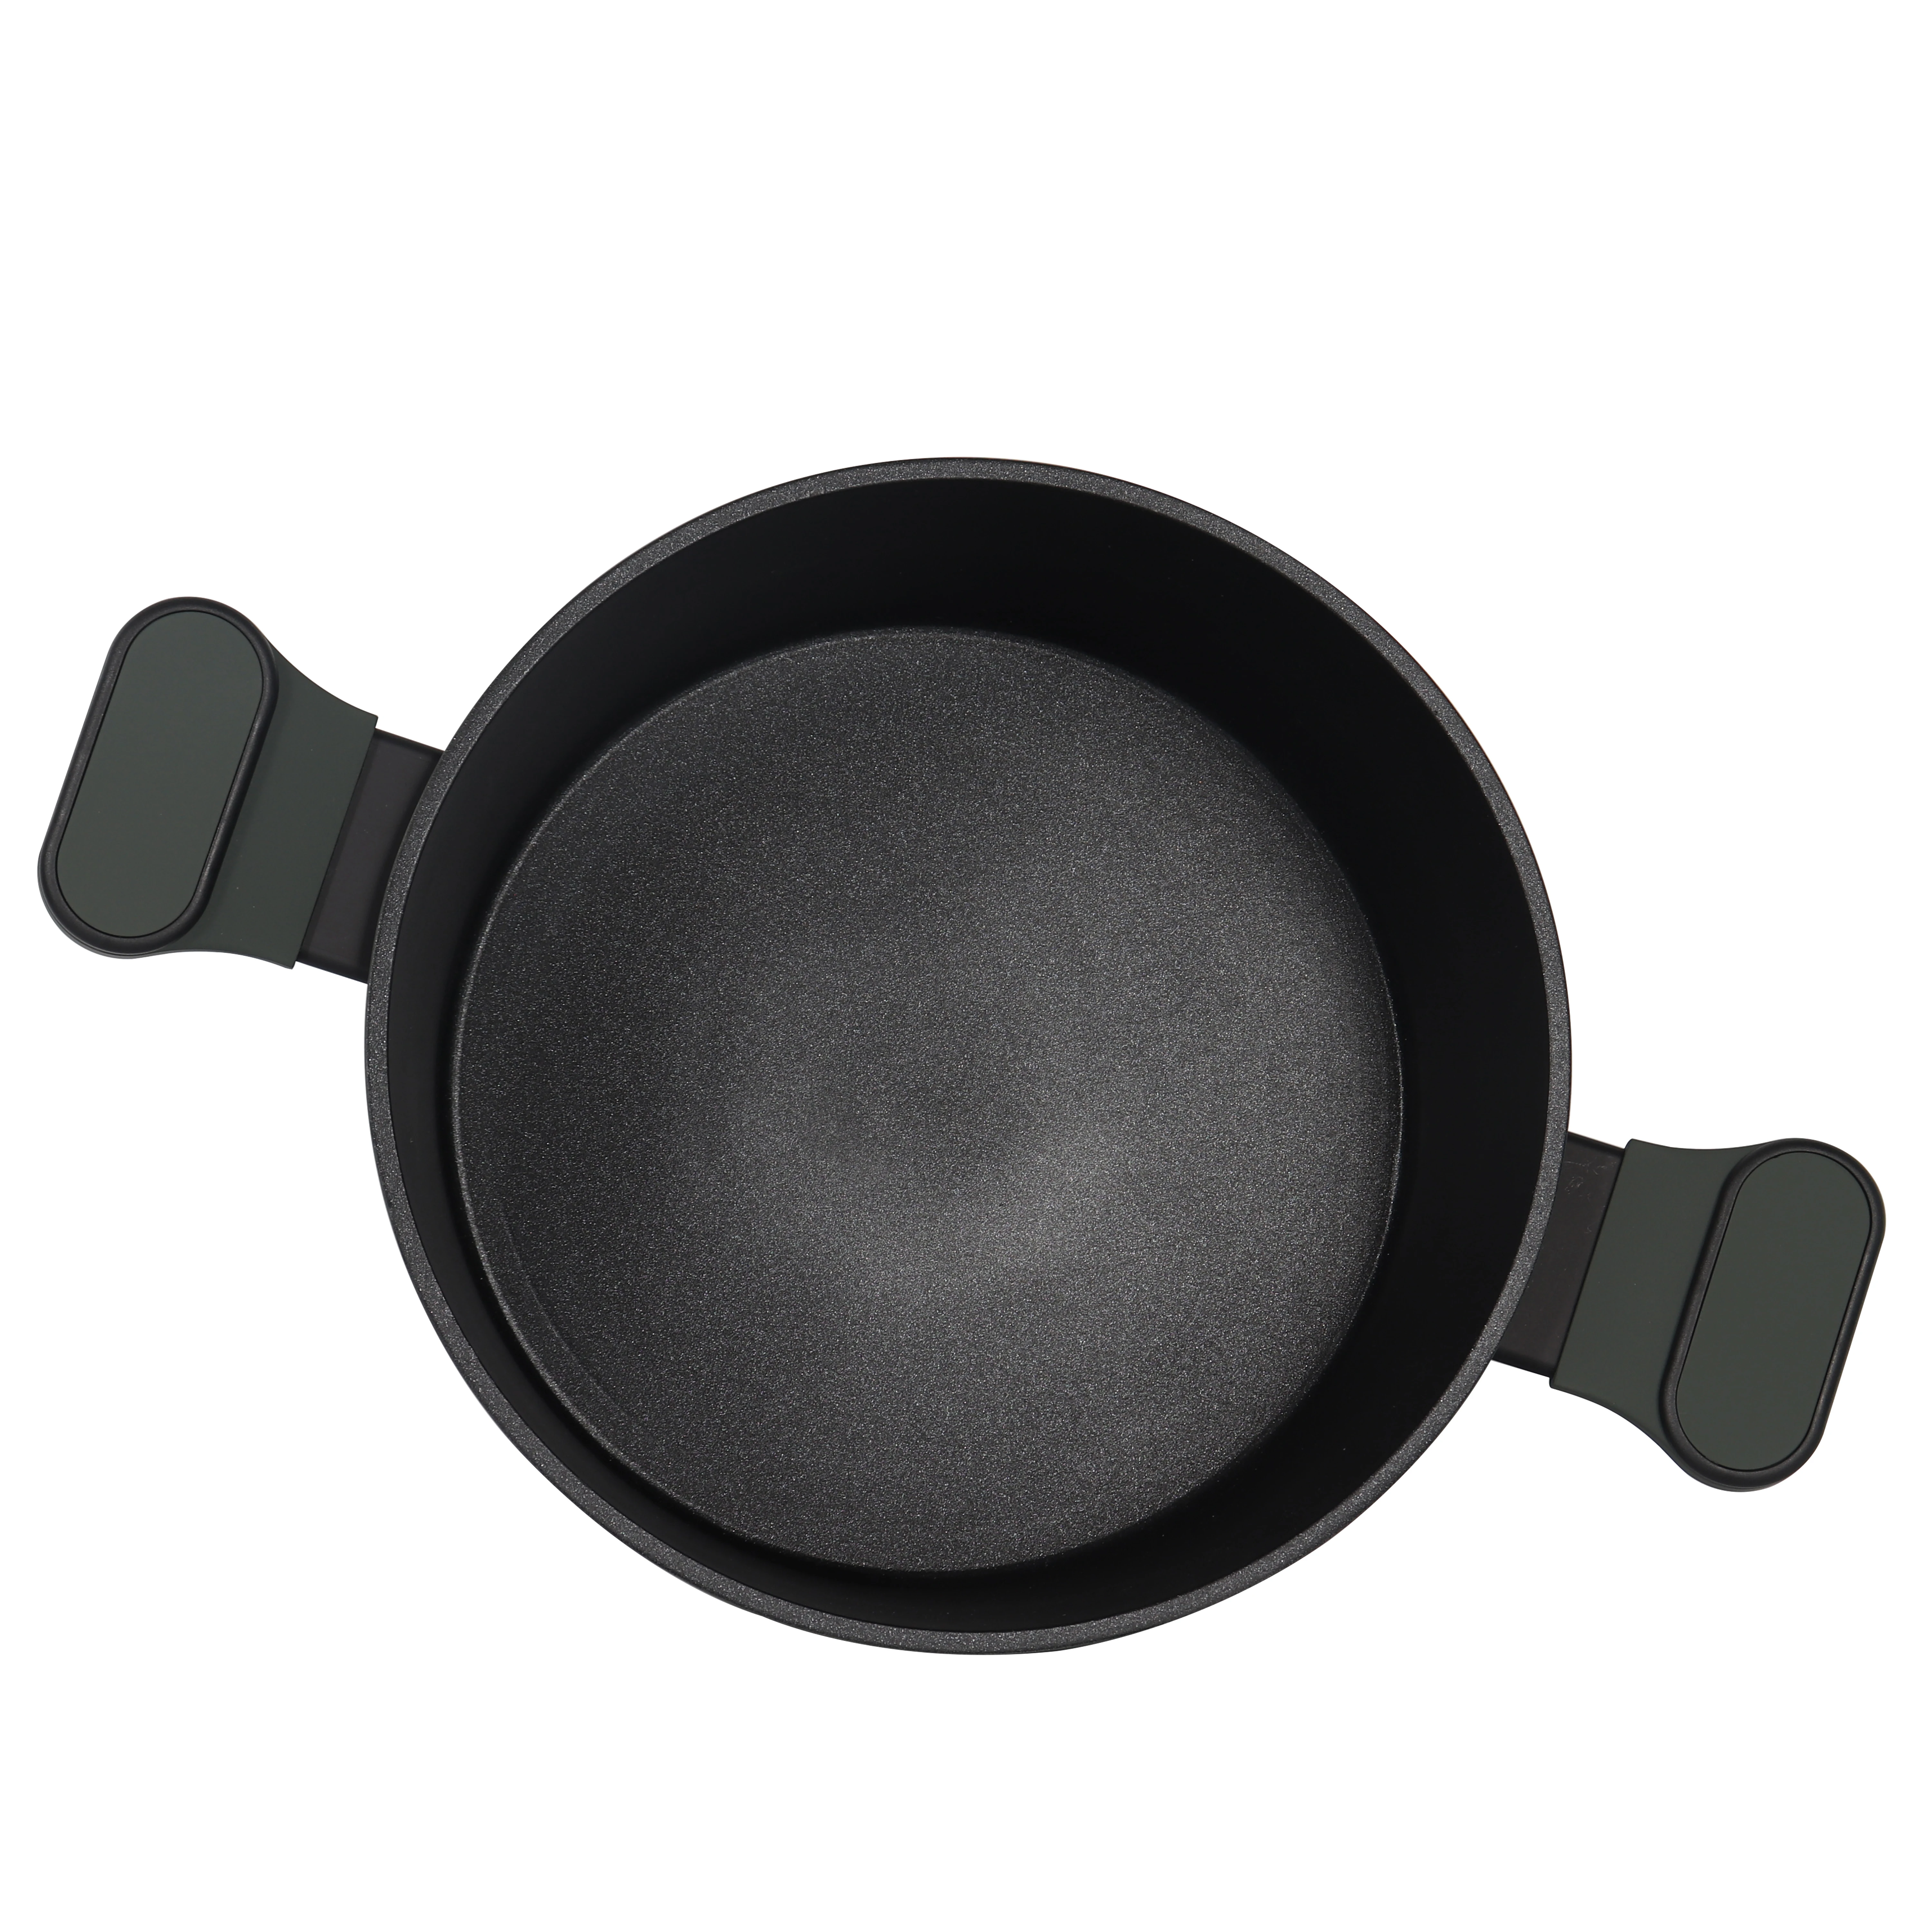 Eco-friendly new type nonstick cookware set